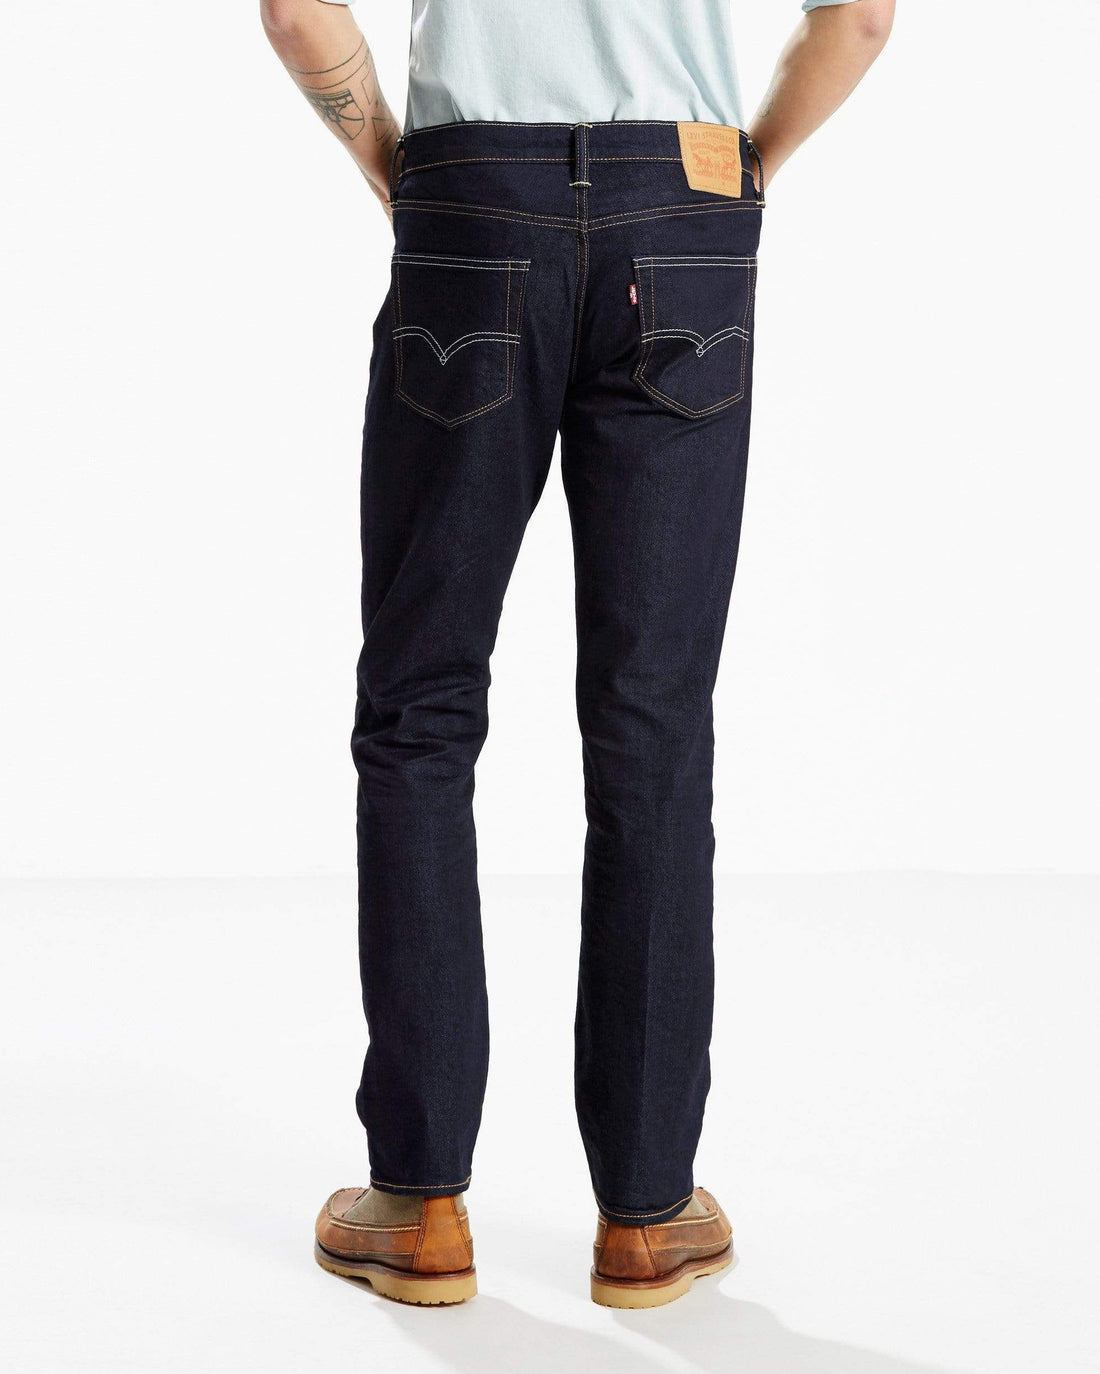 Levis 511 STRONG Slim Fit Mens Jeans - Rock Cod - Jeans and Street ...